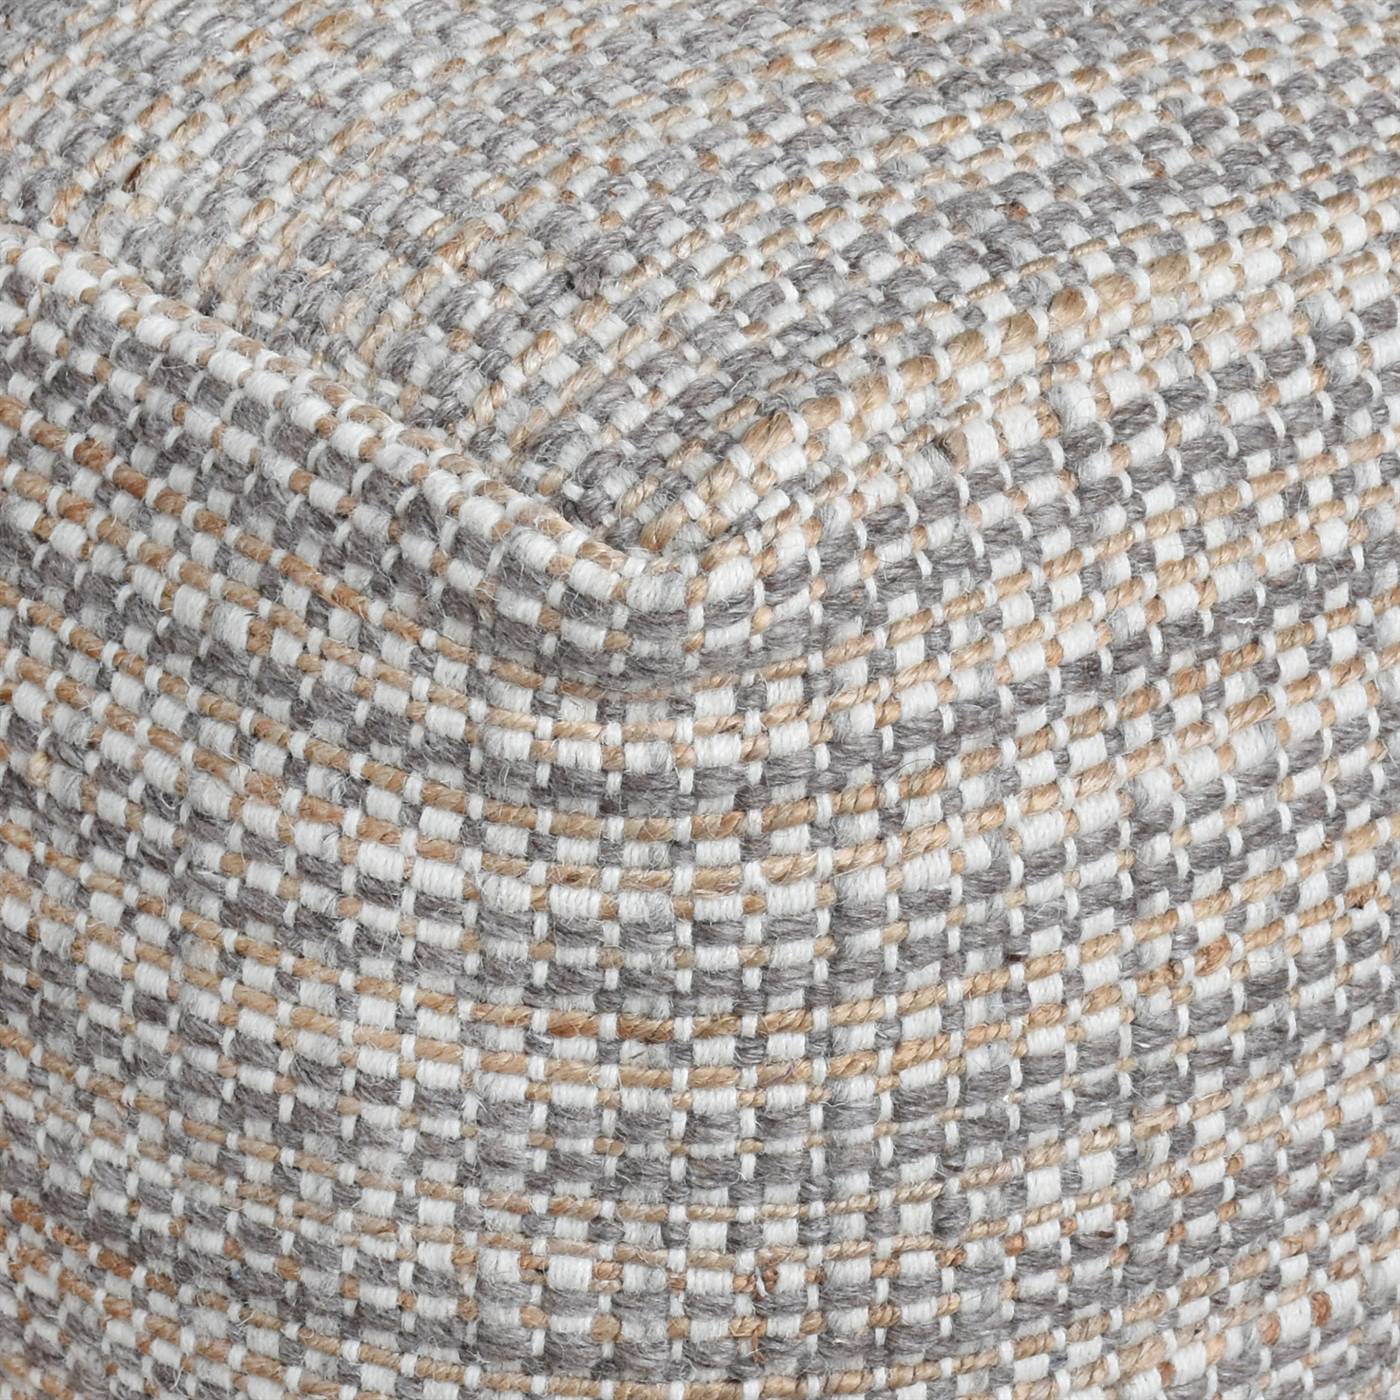 Mcalpin Pouf, 40x40x40 cm, Natural, Taupe, Wool, Jute, Hand Woven, Pitloom, Flat Weave